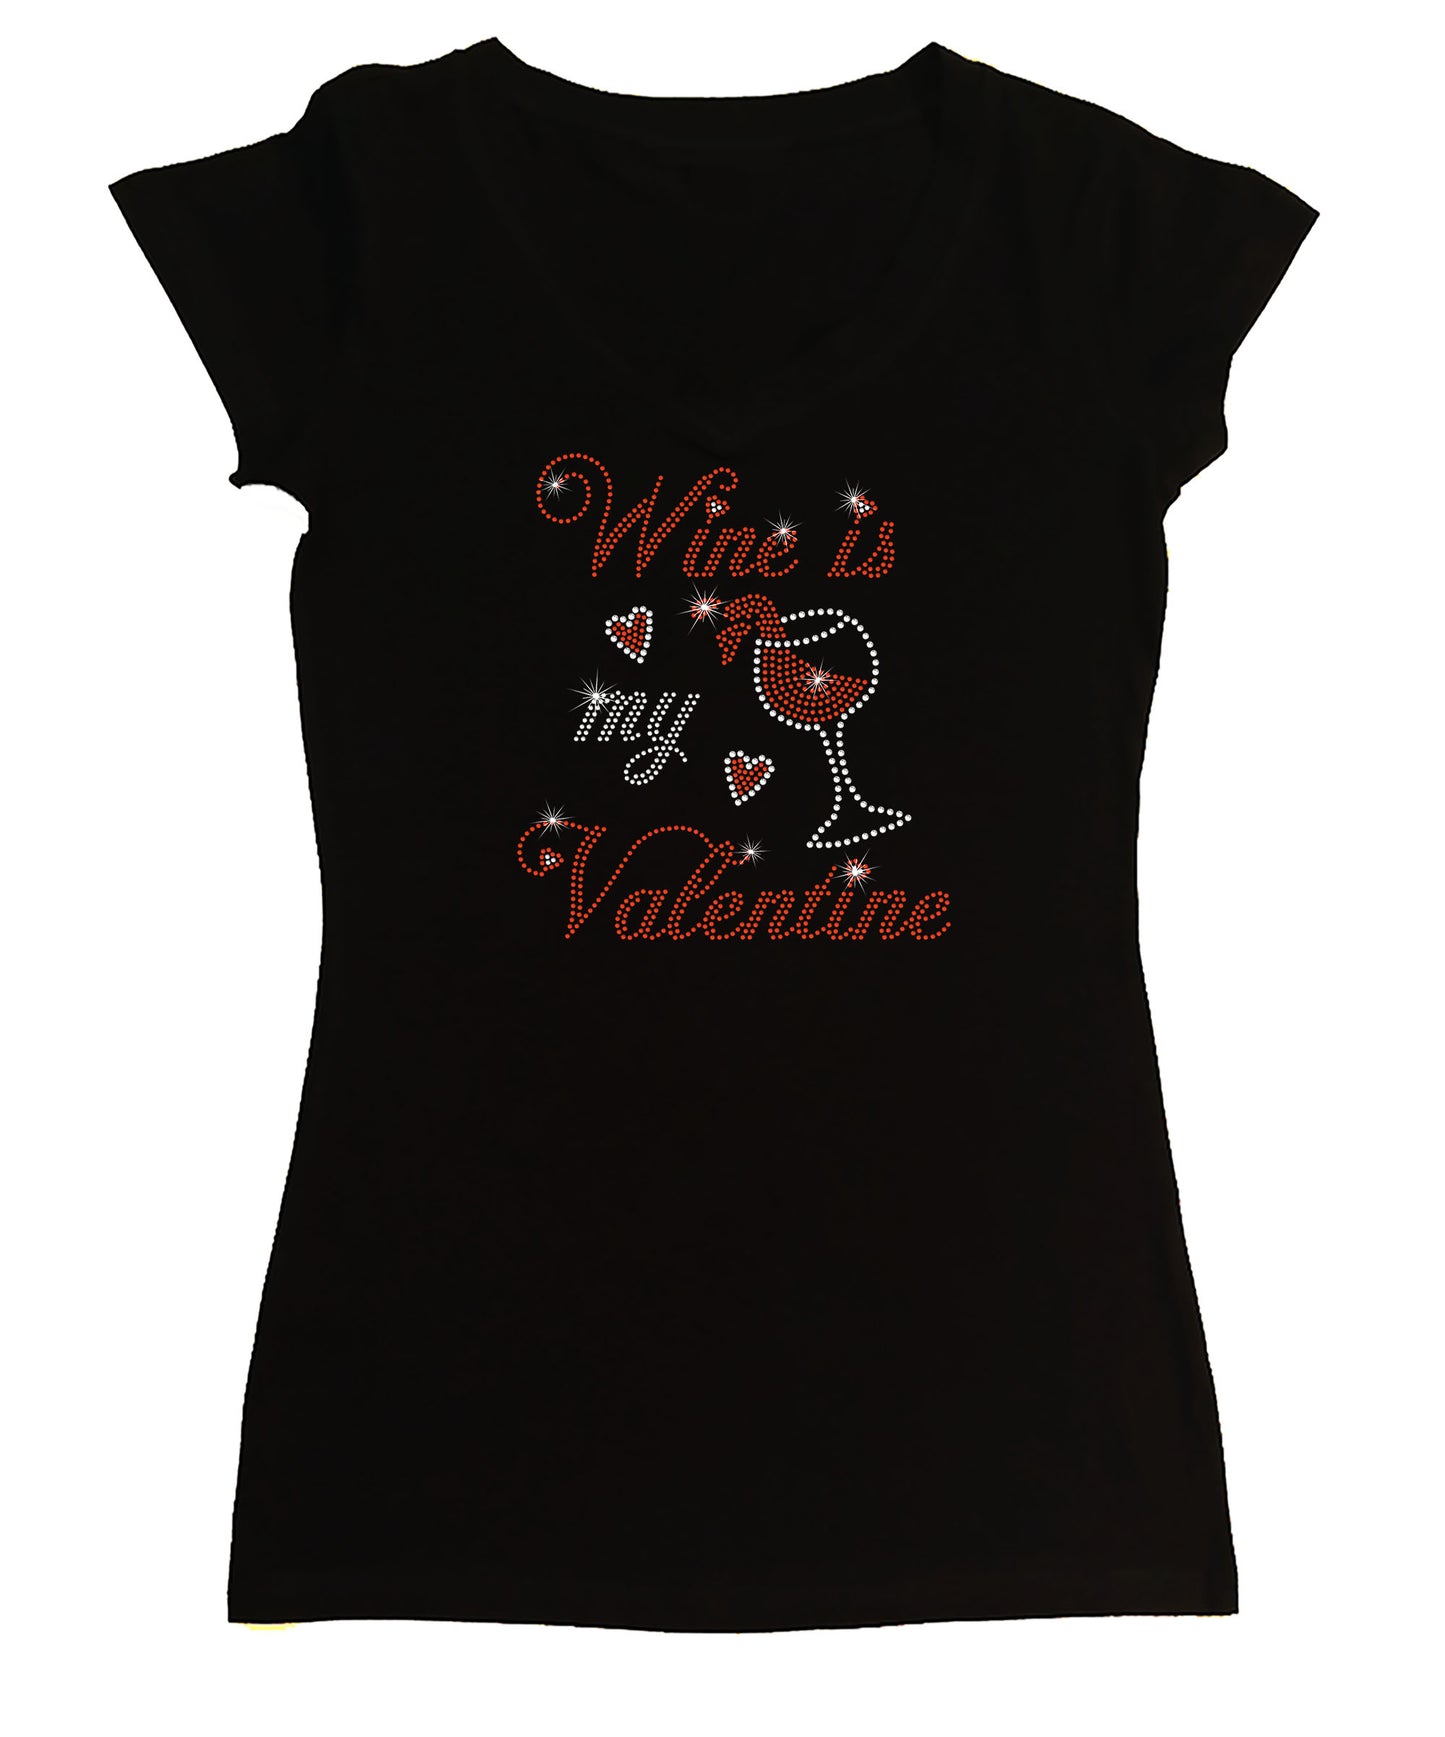 Wine is My Valentine - with Wine Glass and Hearts